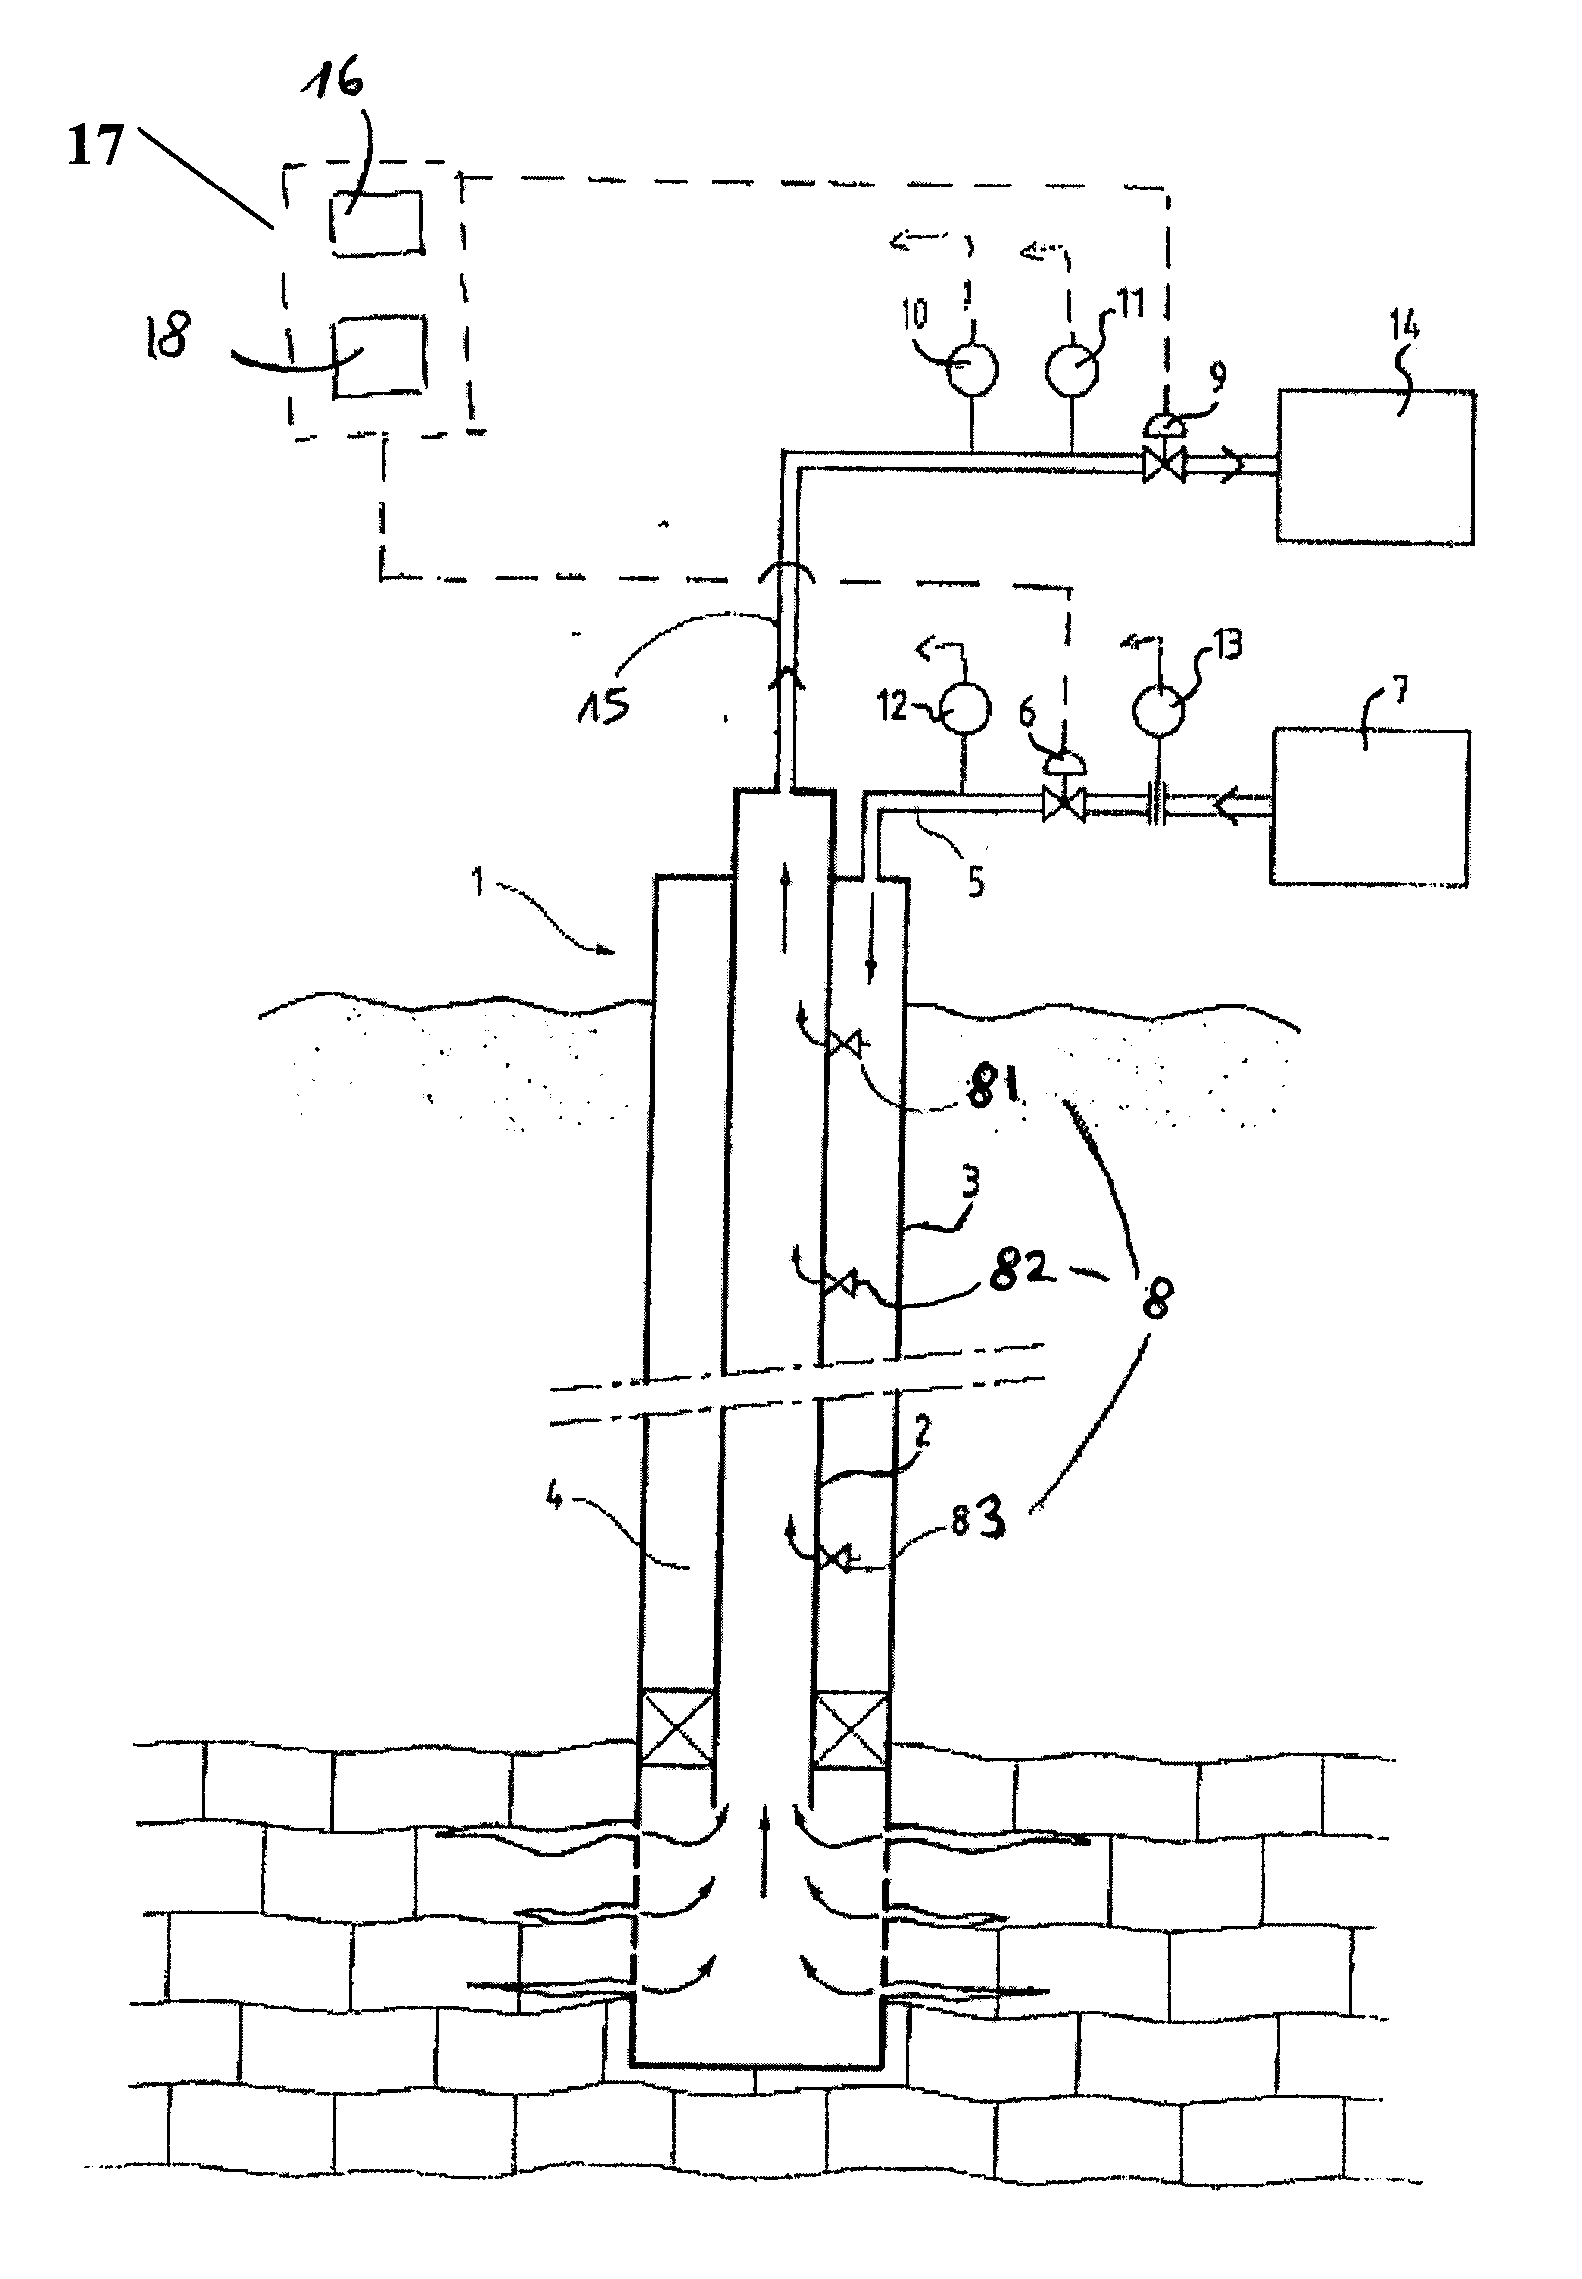 Method for Controlling a Hydrocarbons Production Installation